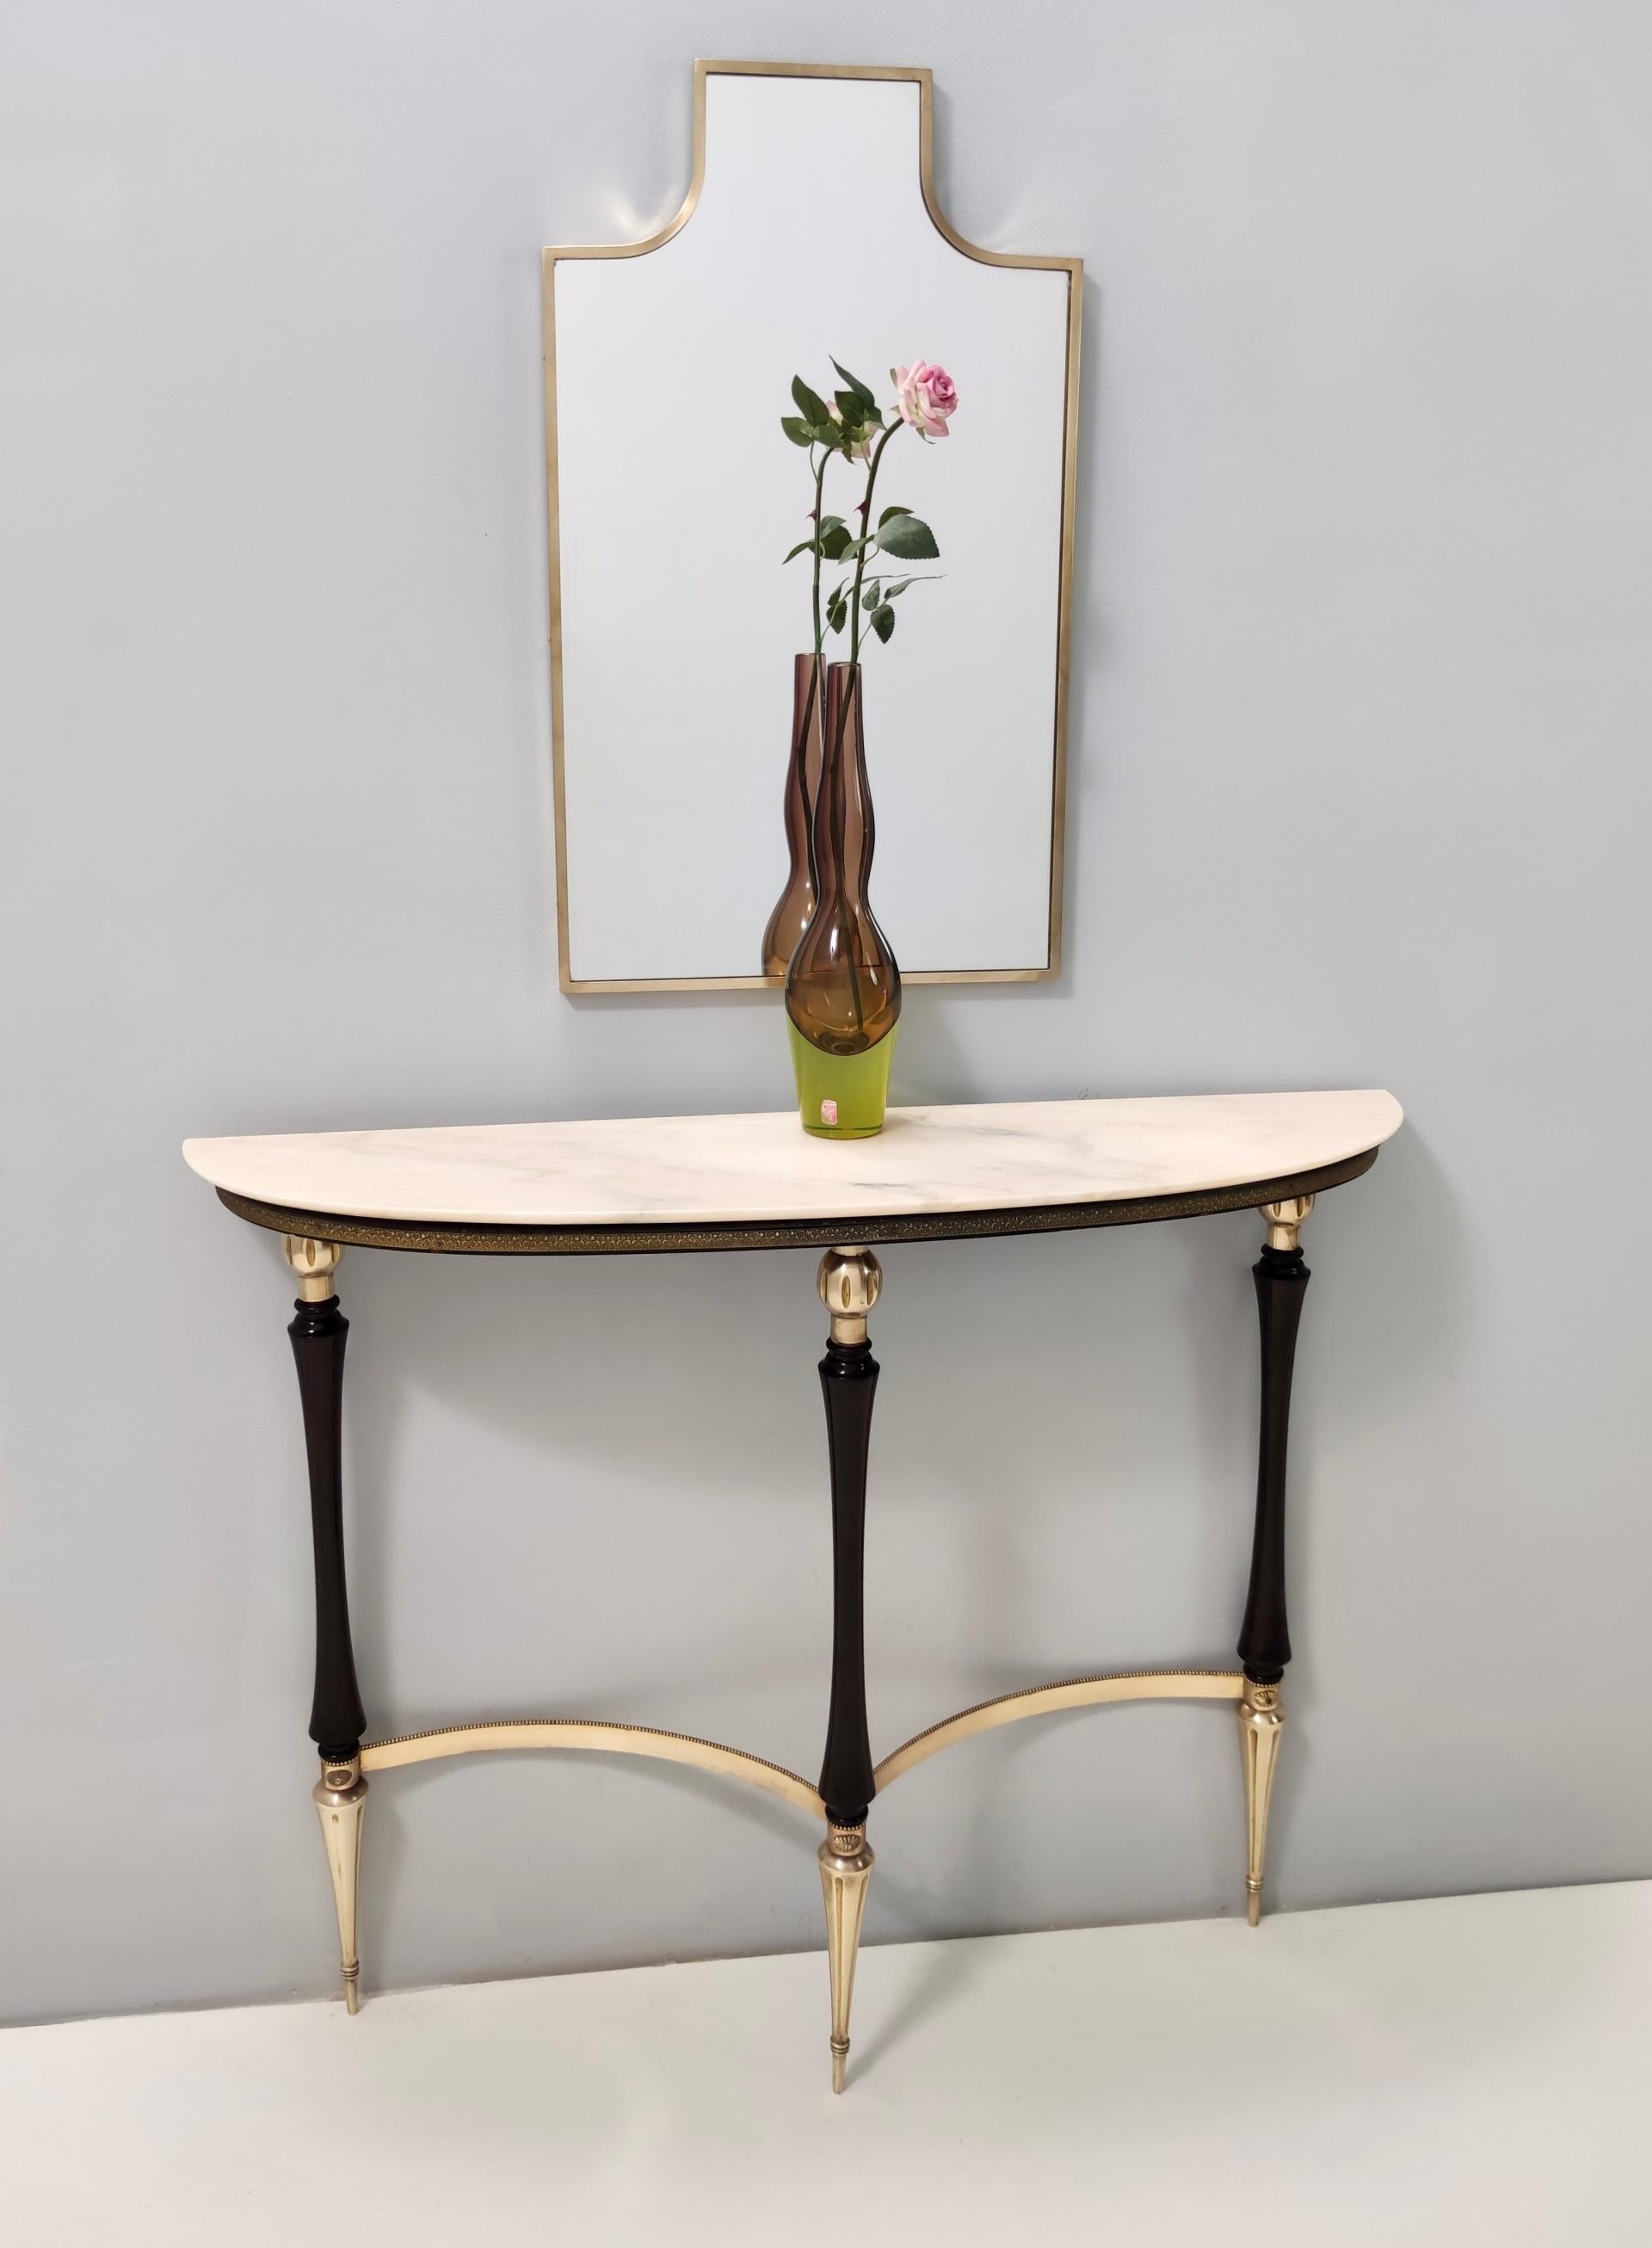 Italy, 1950s.
It features an ebonized beech frame, brass parts and feet caps and a Portuguese pink marble top.
It might show slight traces of use since it's vintage, but it can be considered as in excellent original condition and ready to become a